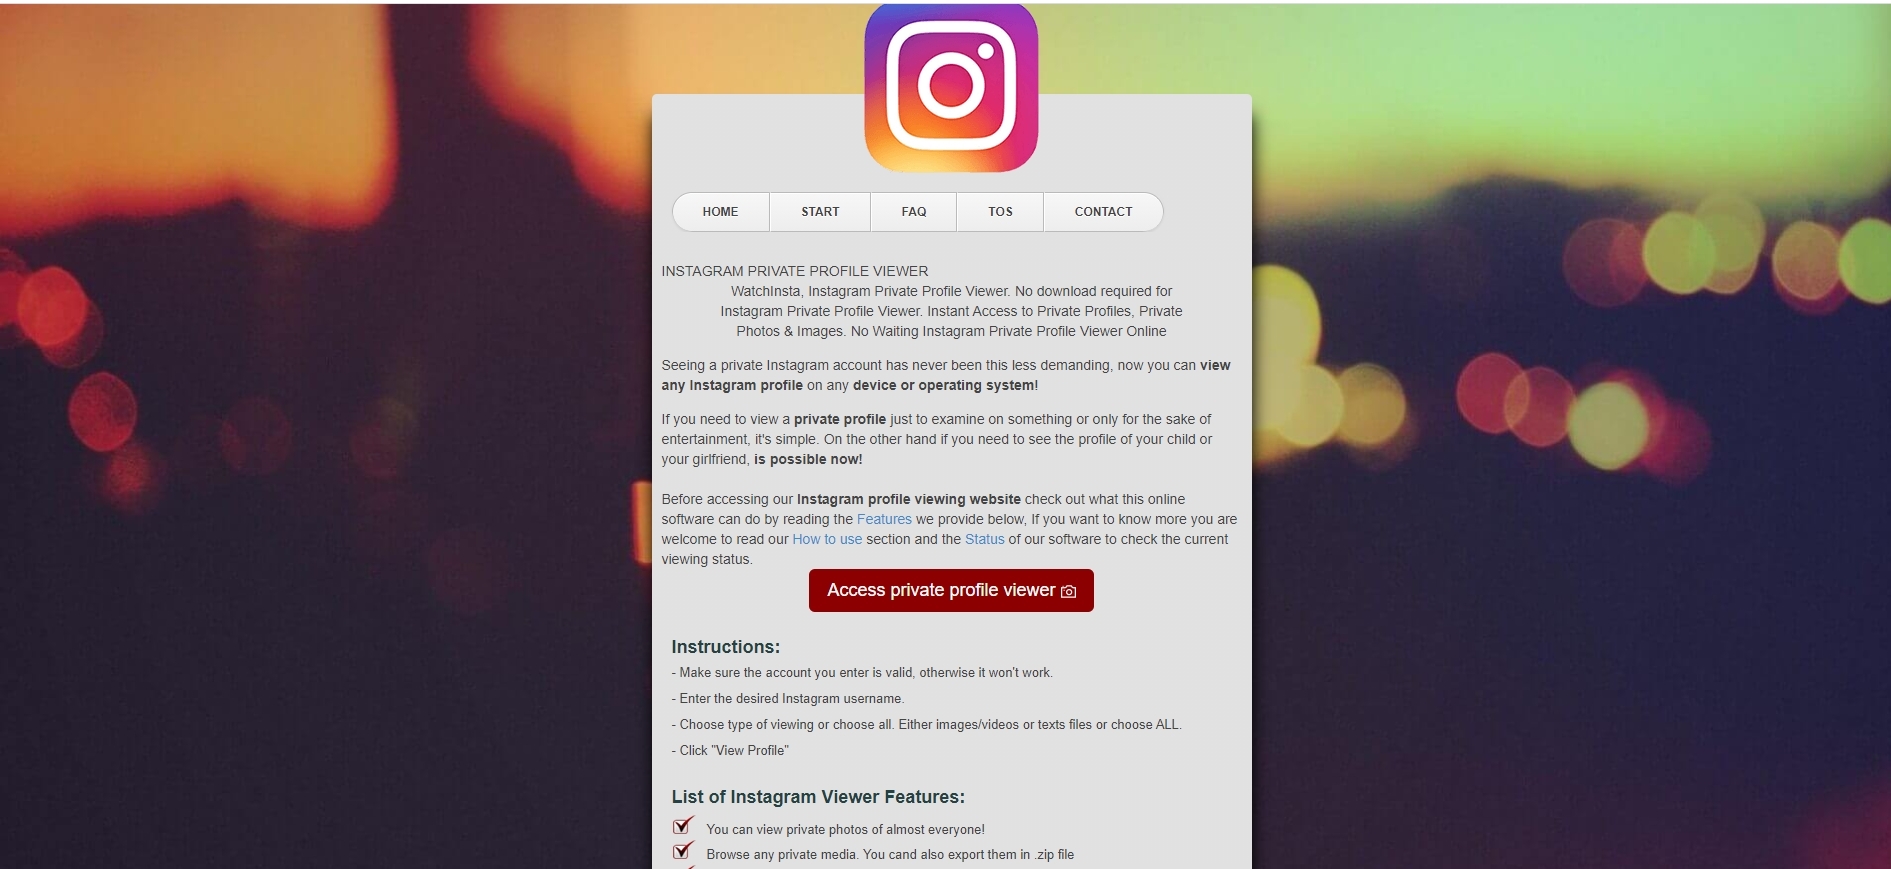 instagram profile picture viewer